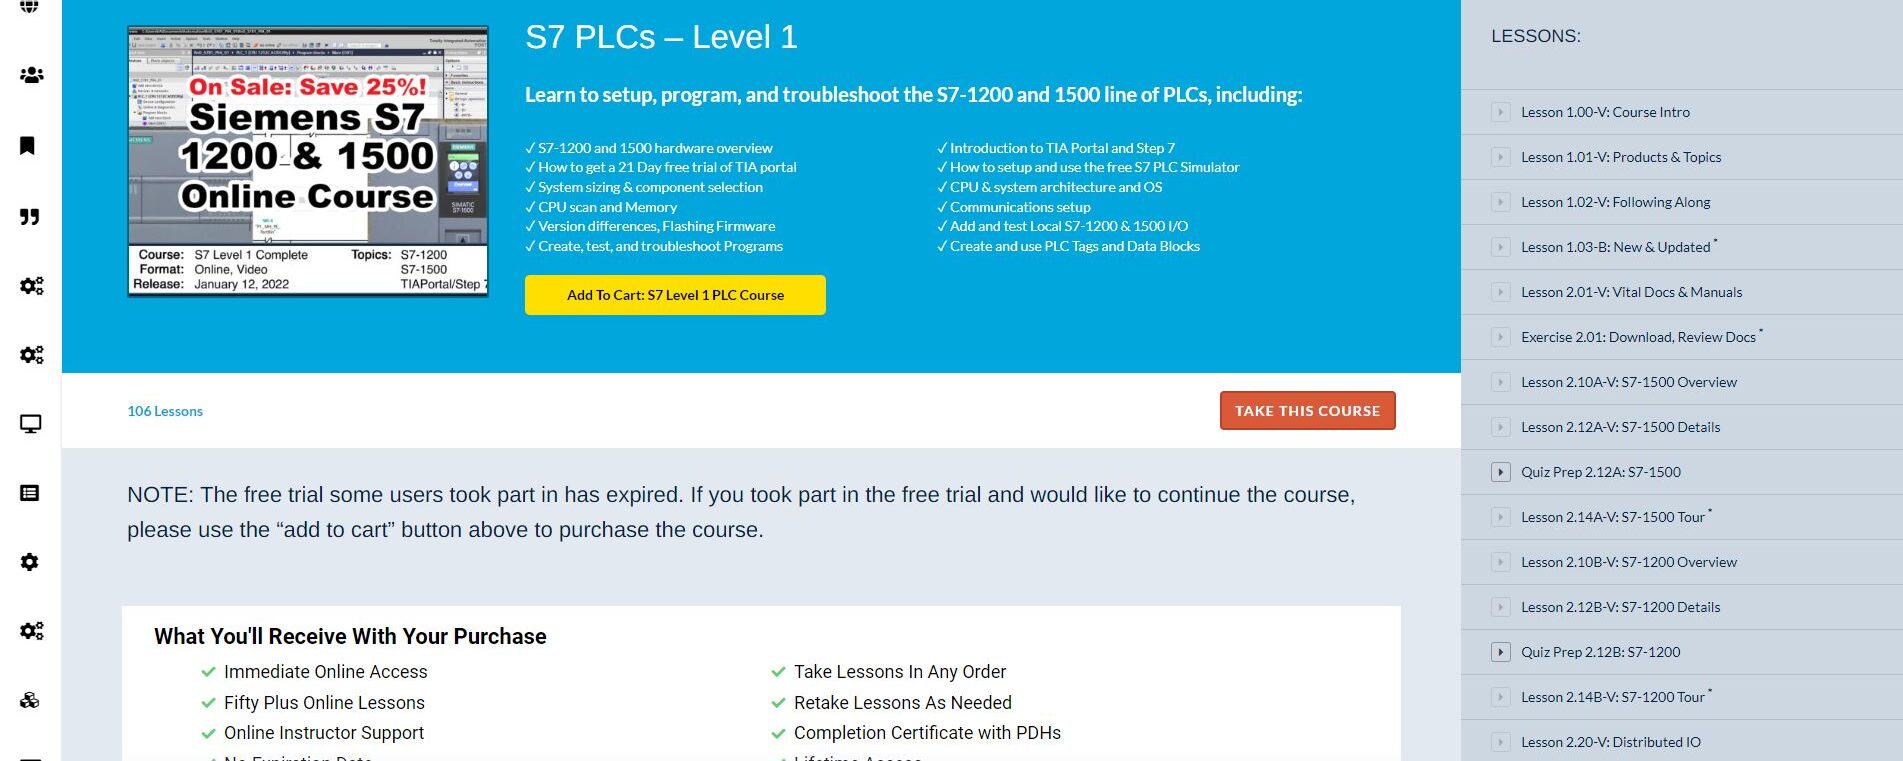 Featured Product: S7 PLCs, Level 1